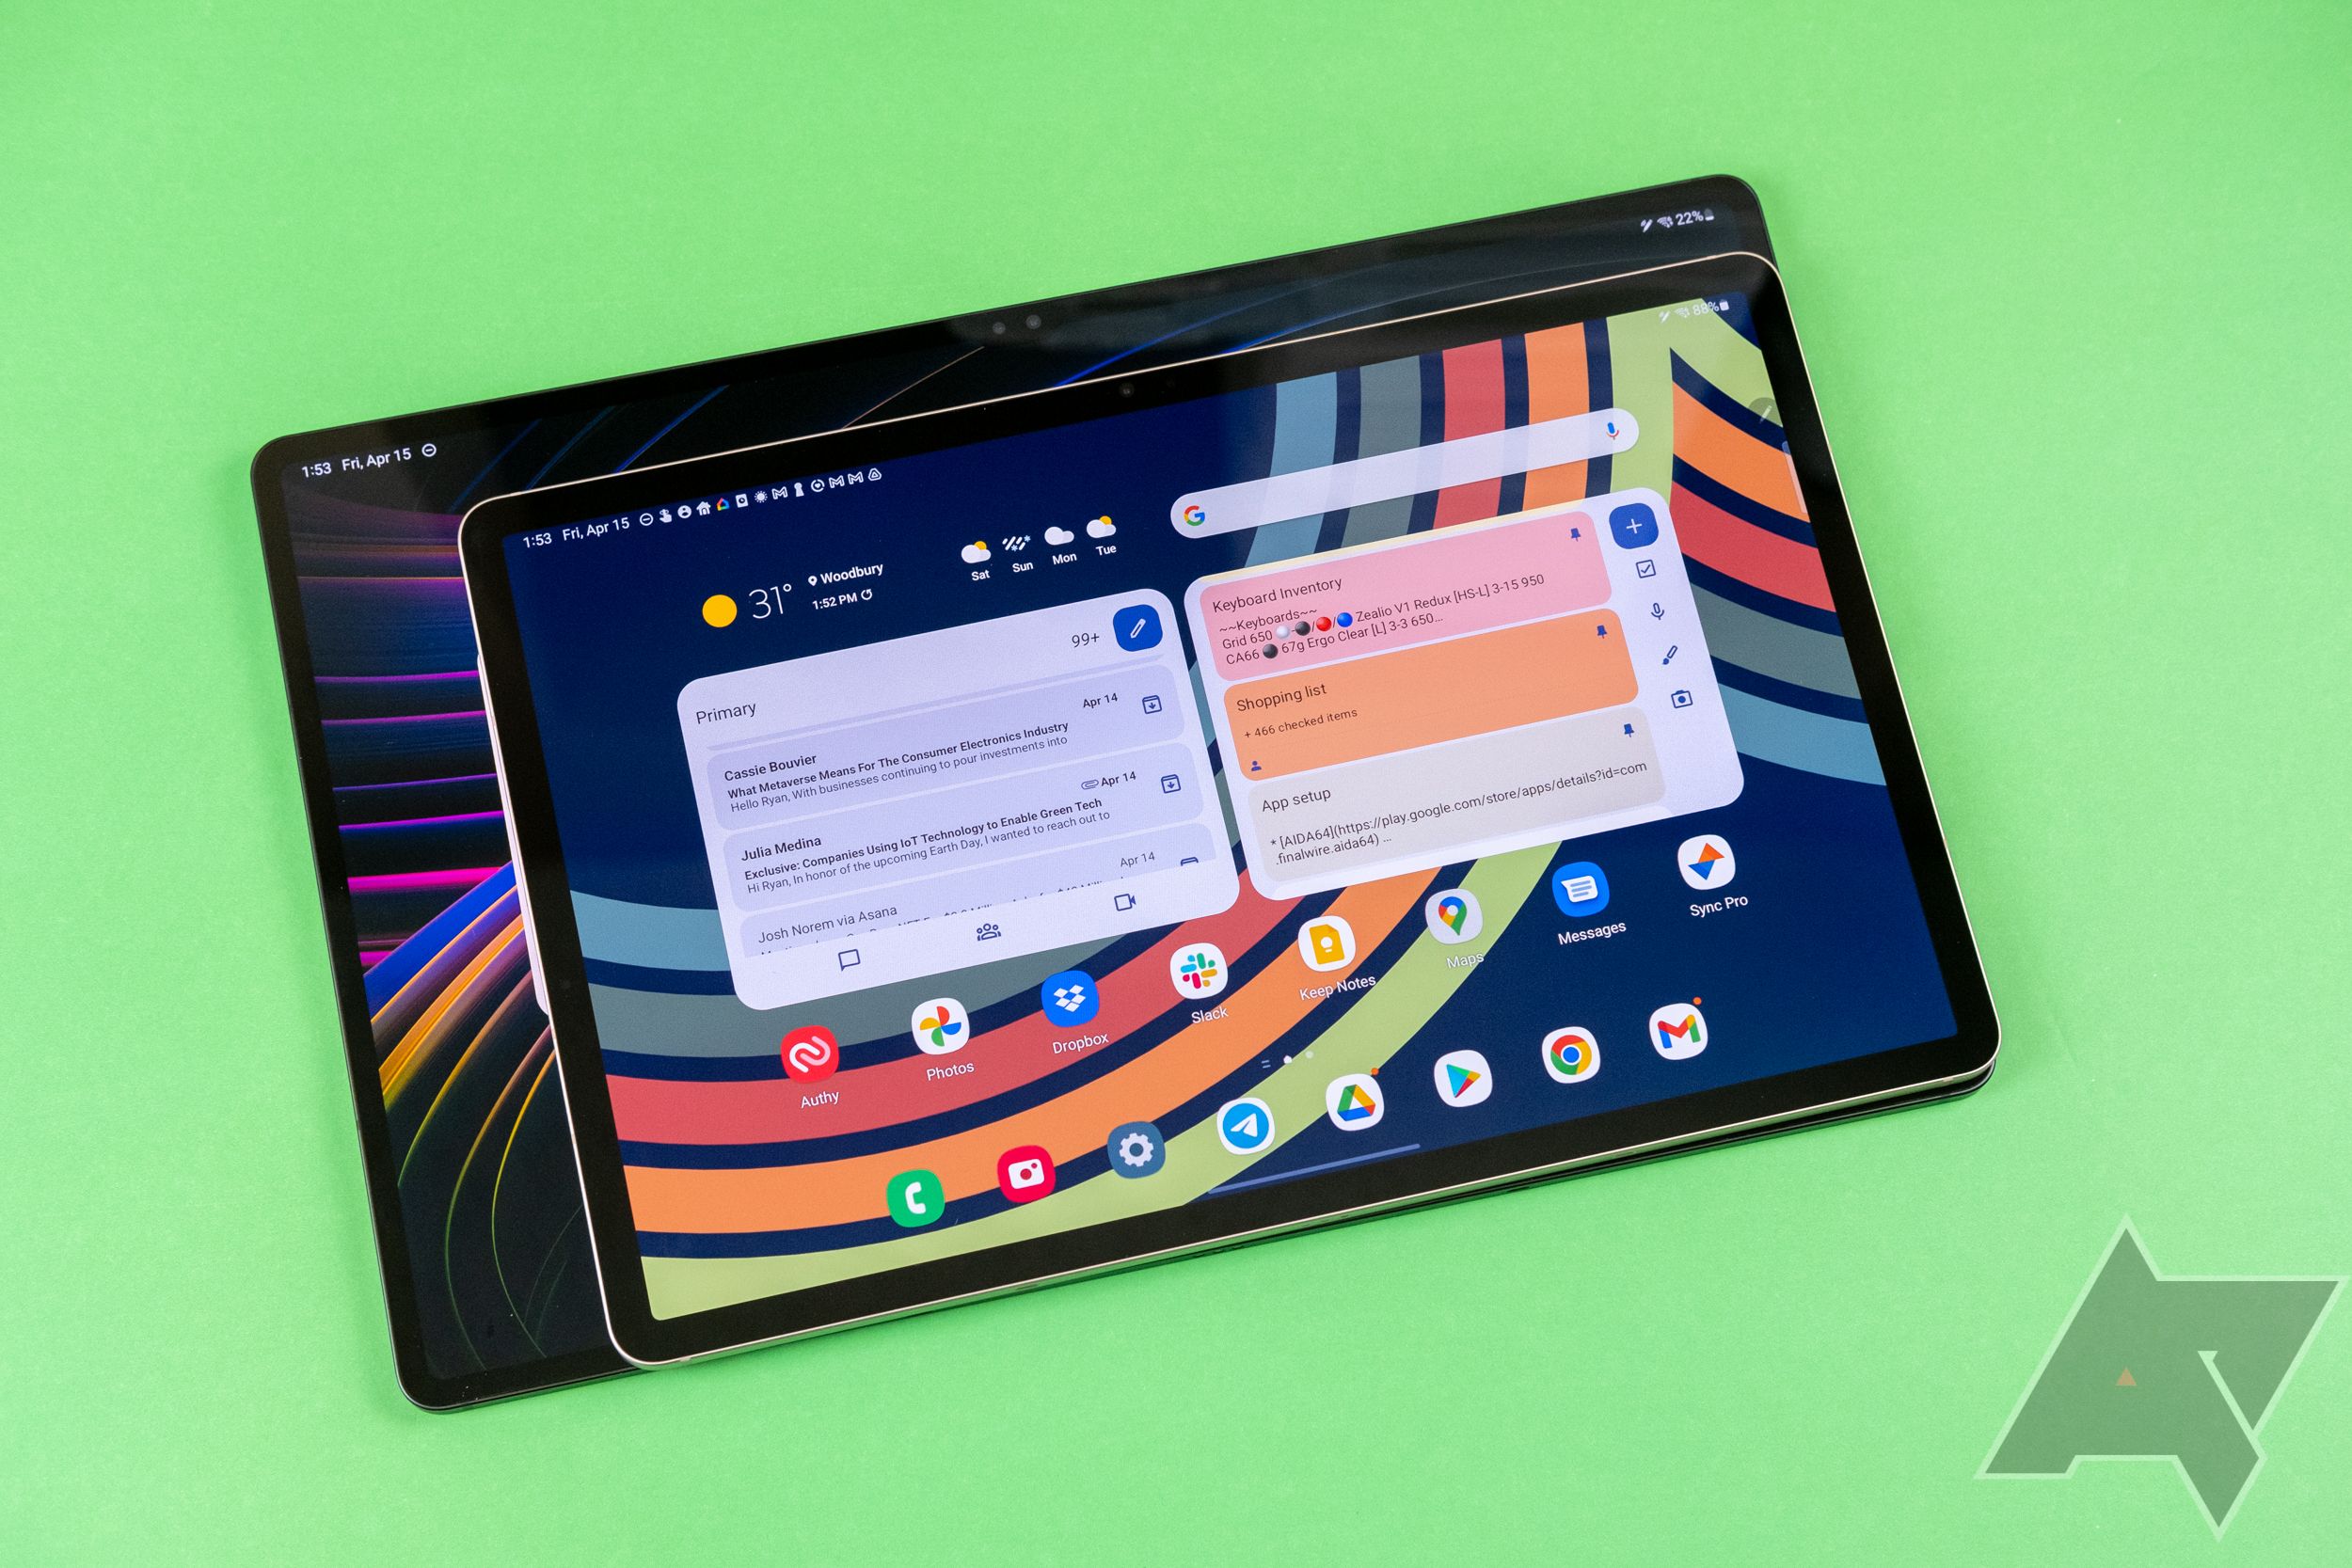 Samsung’s entire Galaxy Tab S8 lineup is down to an unbelievable price this Black Friday